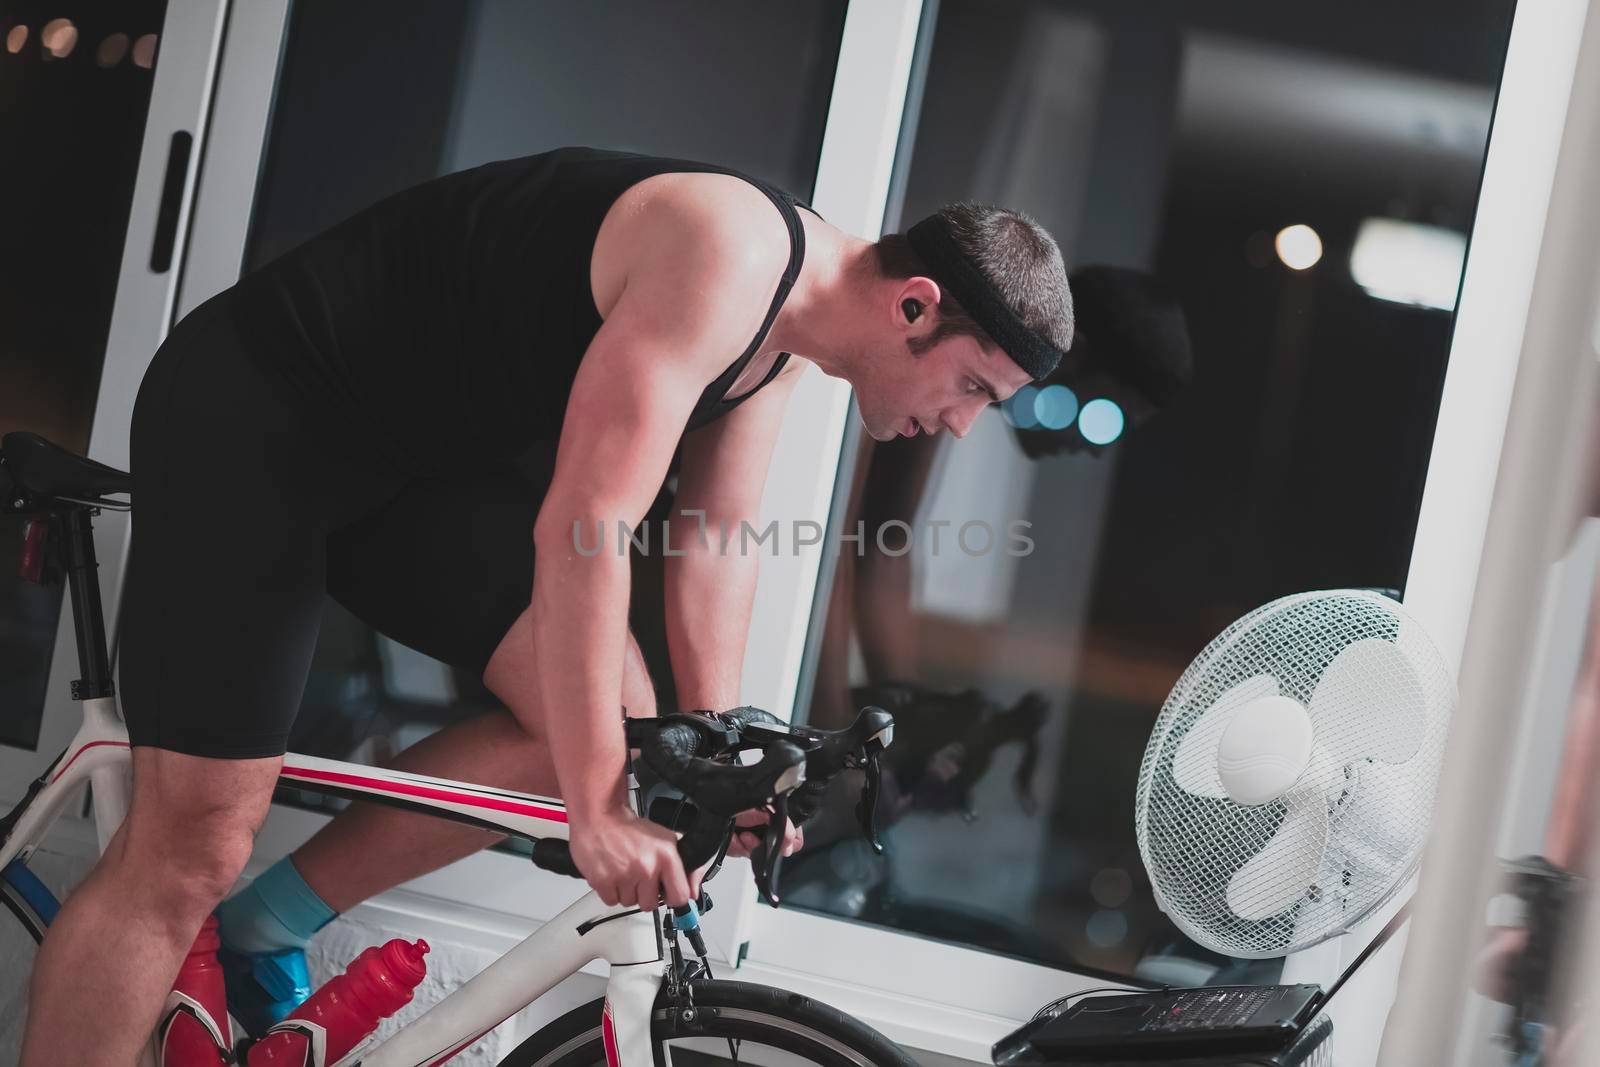 Man cycling on the machine trainer he is exercising in the home at night. Playing online bike racing game during coronavirus covid19 lockdown. New normal concept.